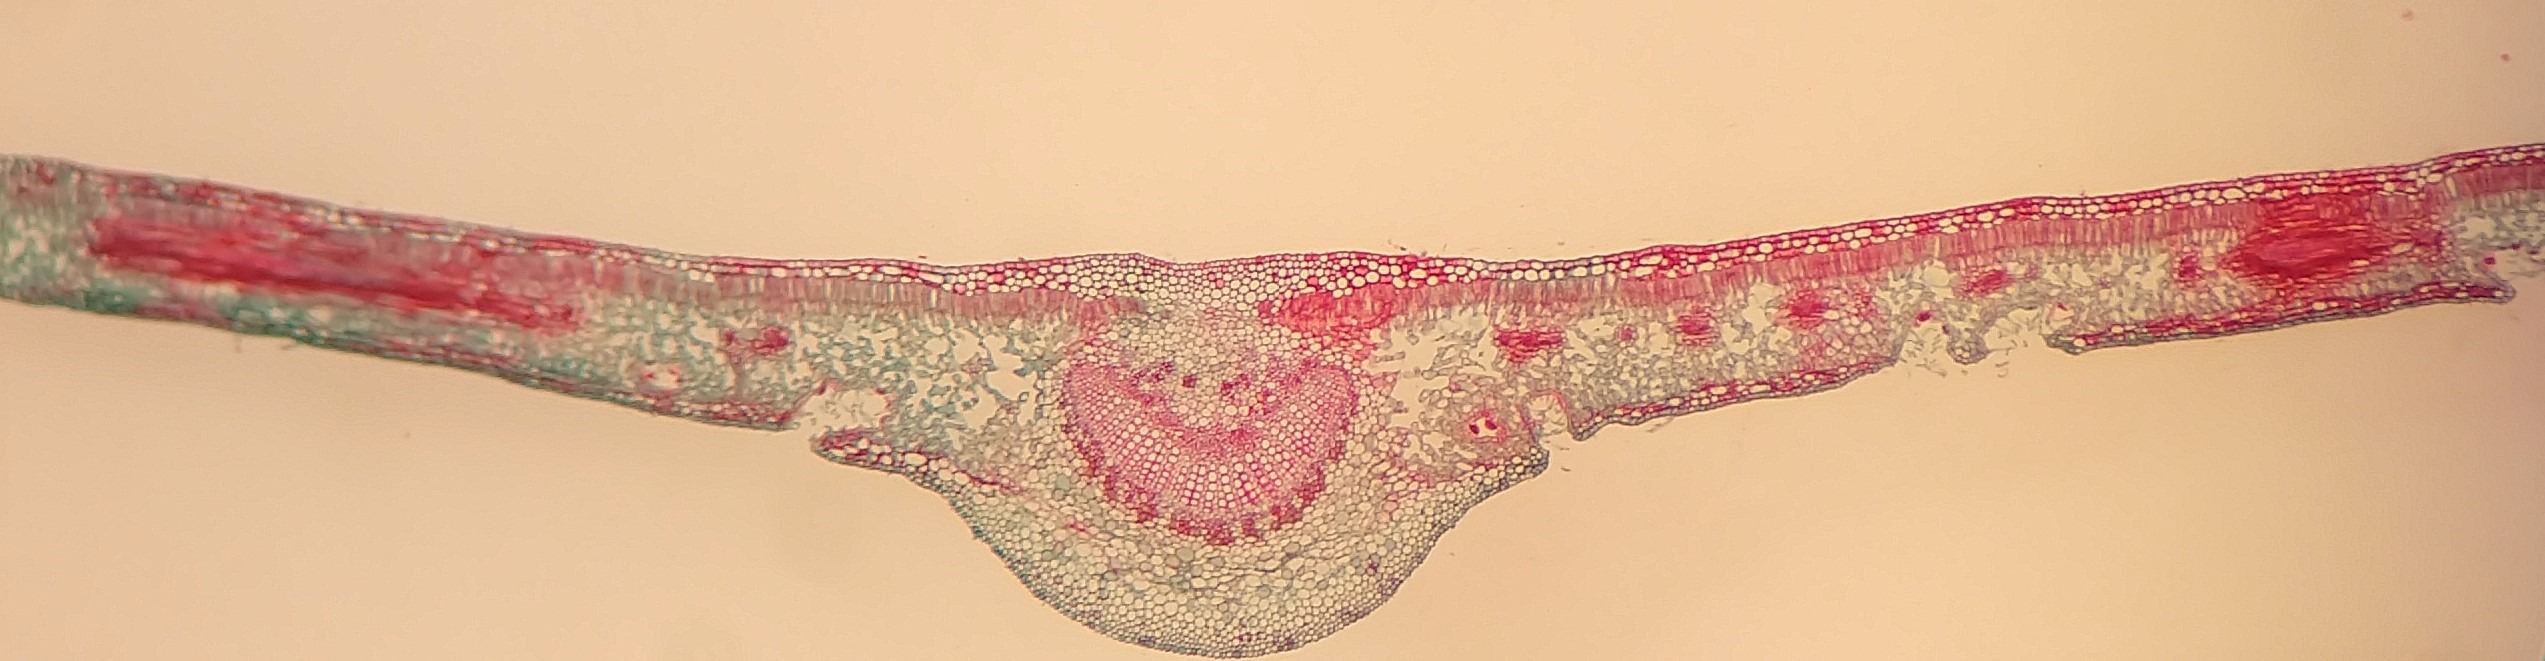 A cross section through a xerophytic leaf, unlabeled